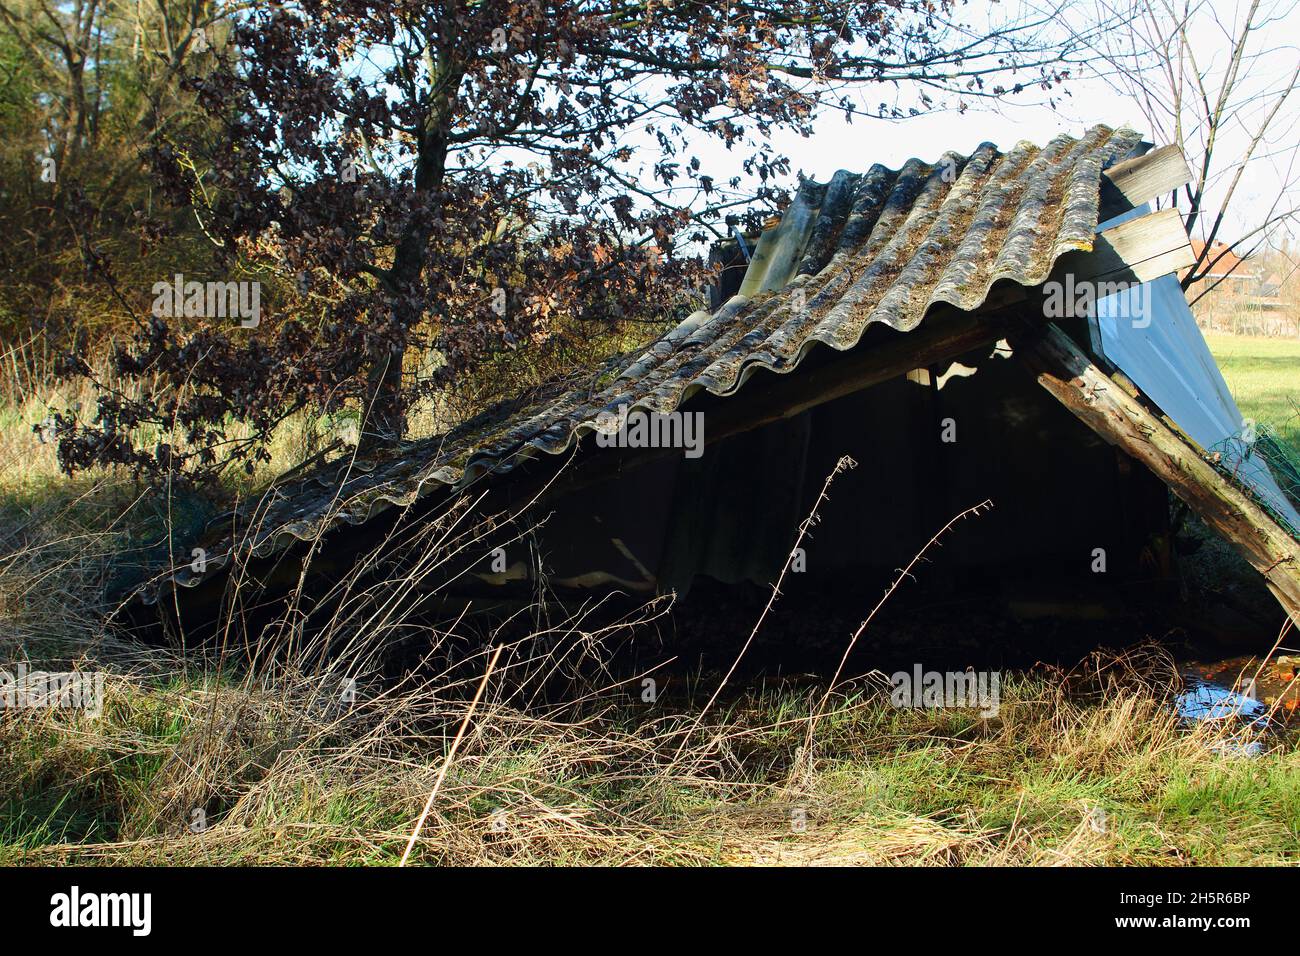 Small old wooden shed surrounded by grass and forest. Construction with wood and junk materials. Roof with asbestos plates. Stock Photo